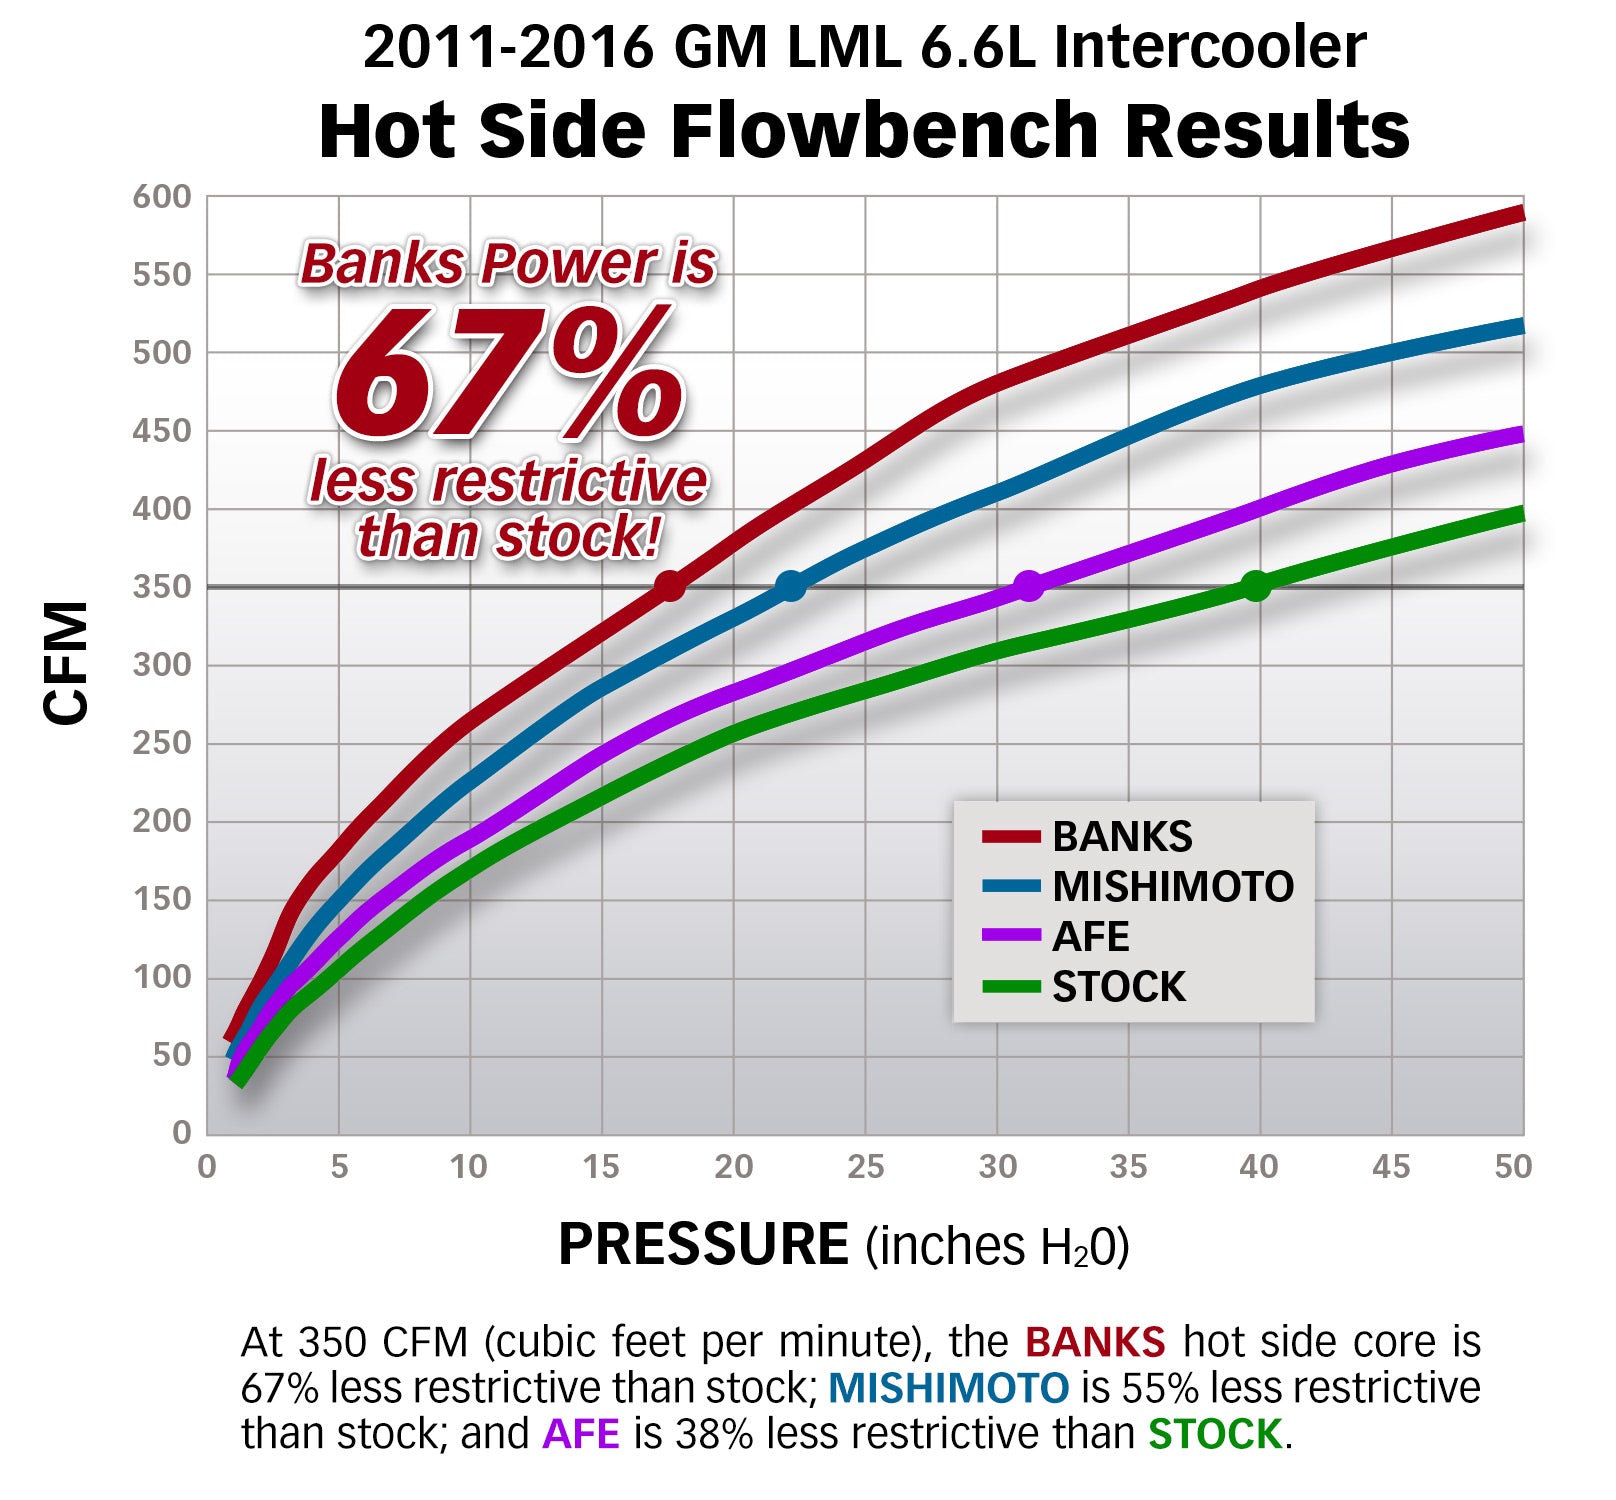 Banks Intercooler is 67% less restrictive than stock